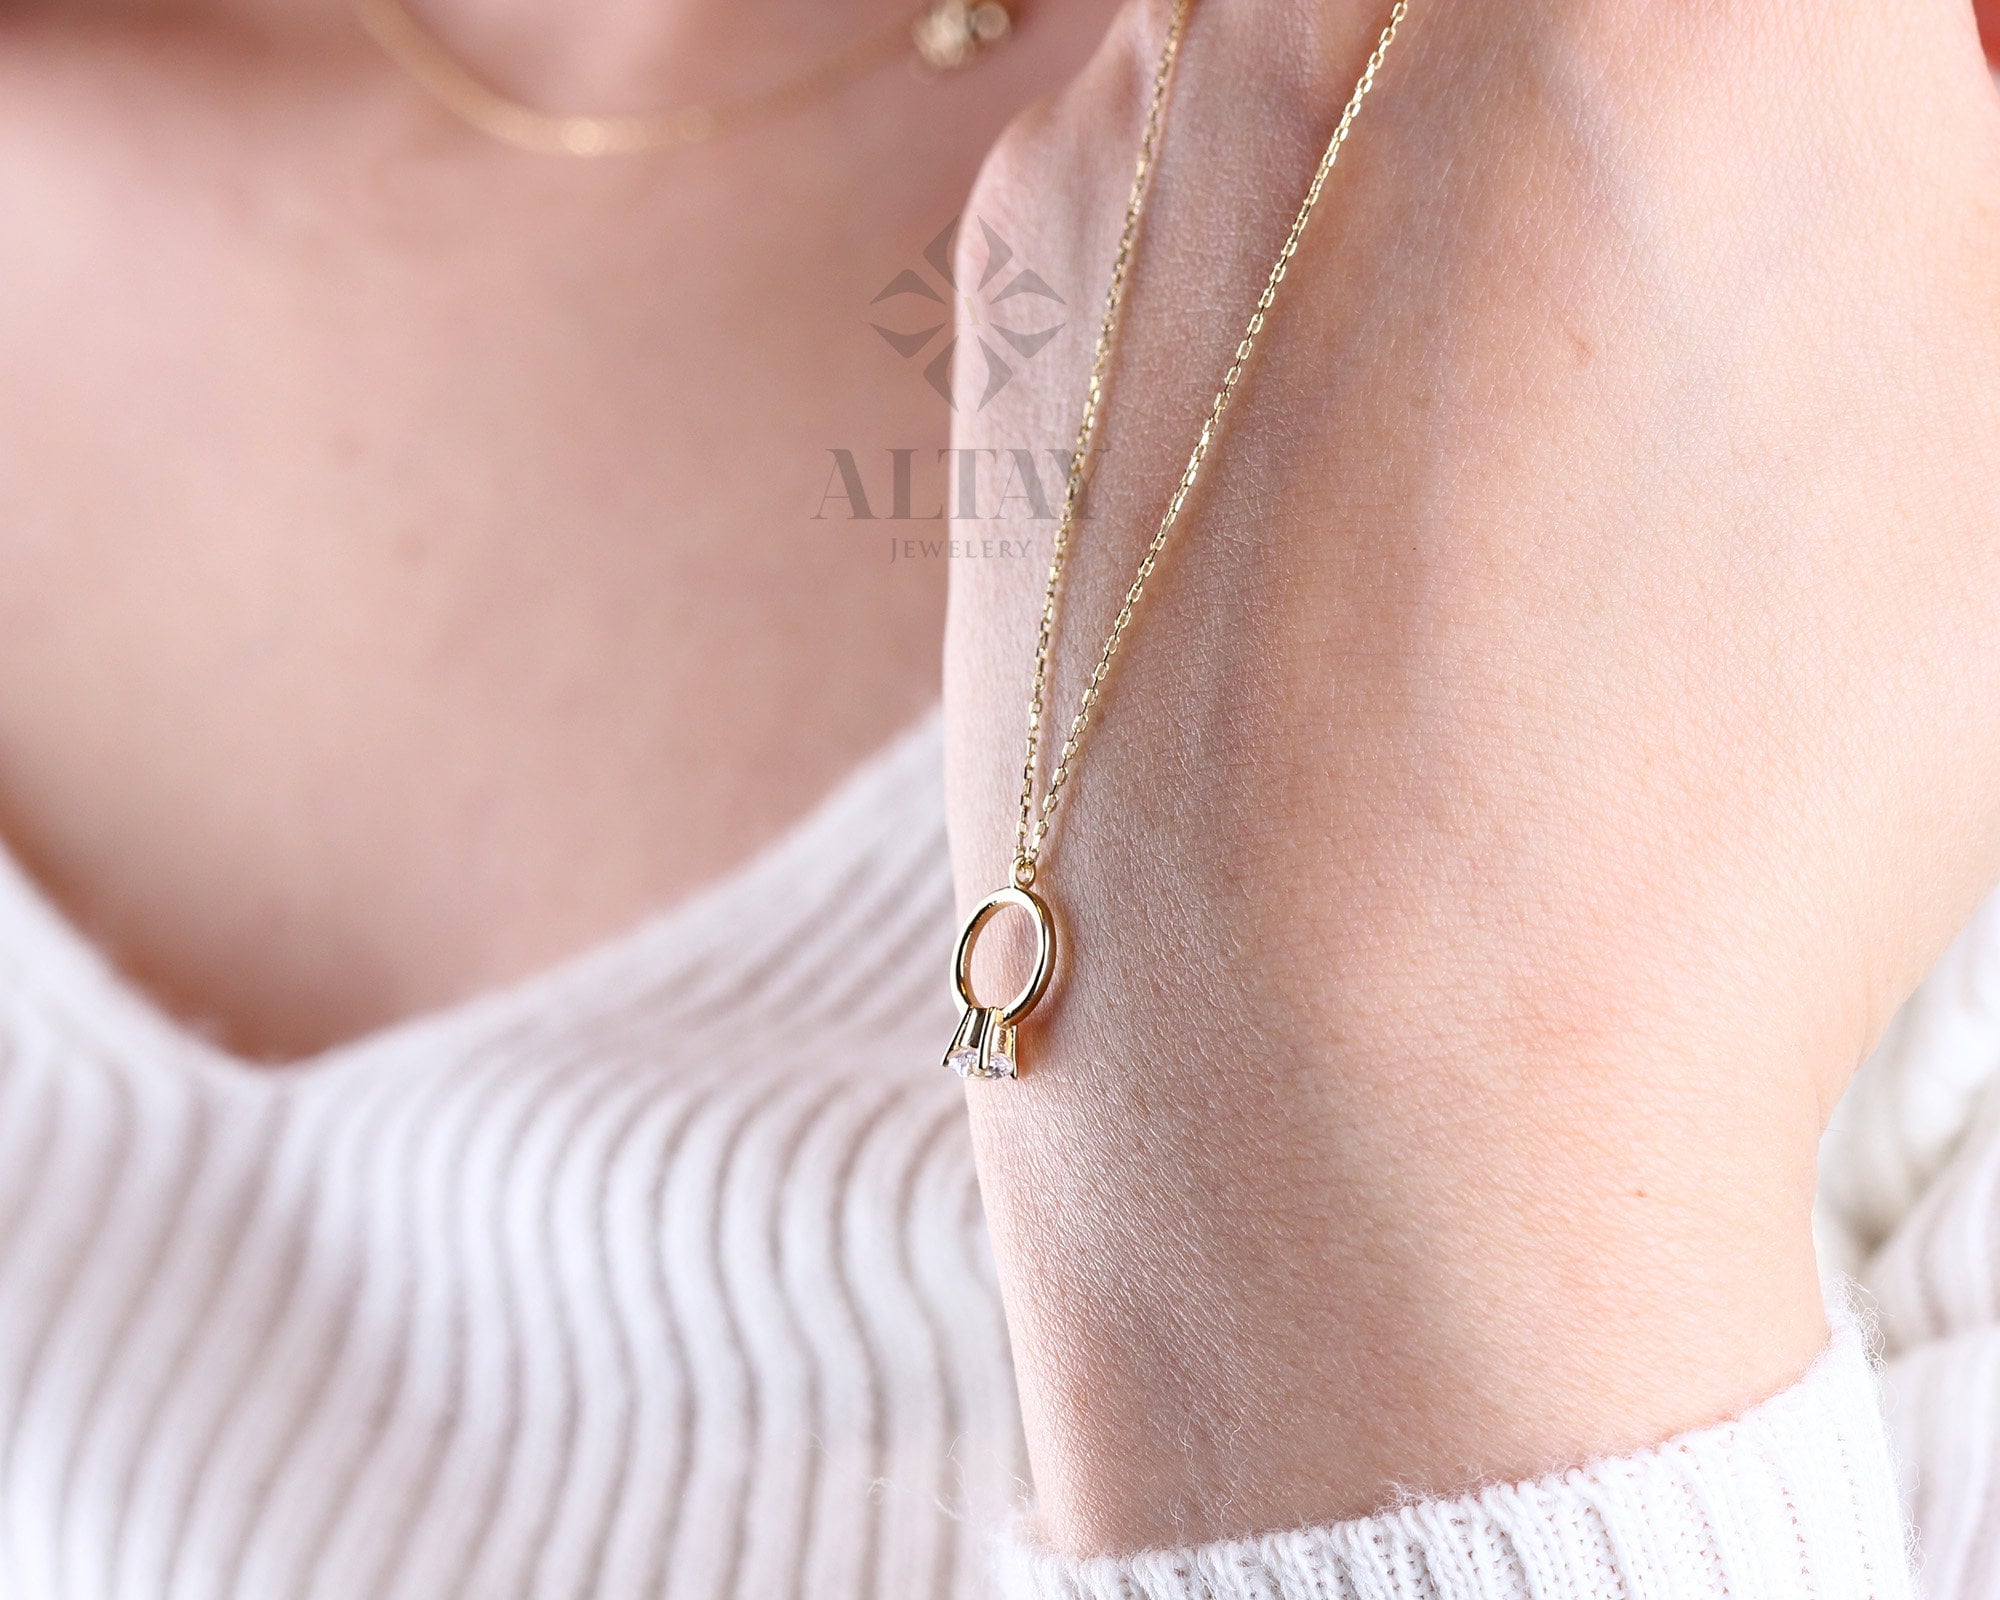 14K Gold Solitaire Ring Necklace, Dainty Gold Circle, Karma Necklace, Eternity, Simple Open Circle, Christmas Gift, Gift for Her